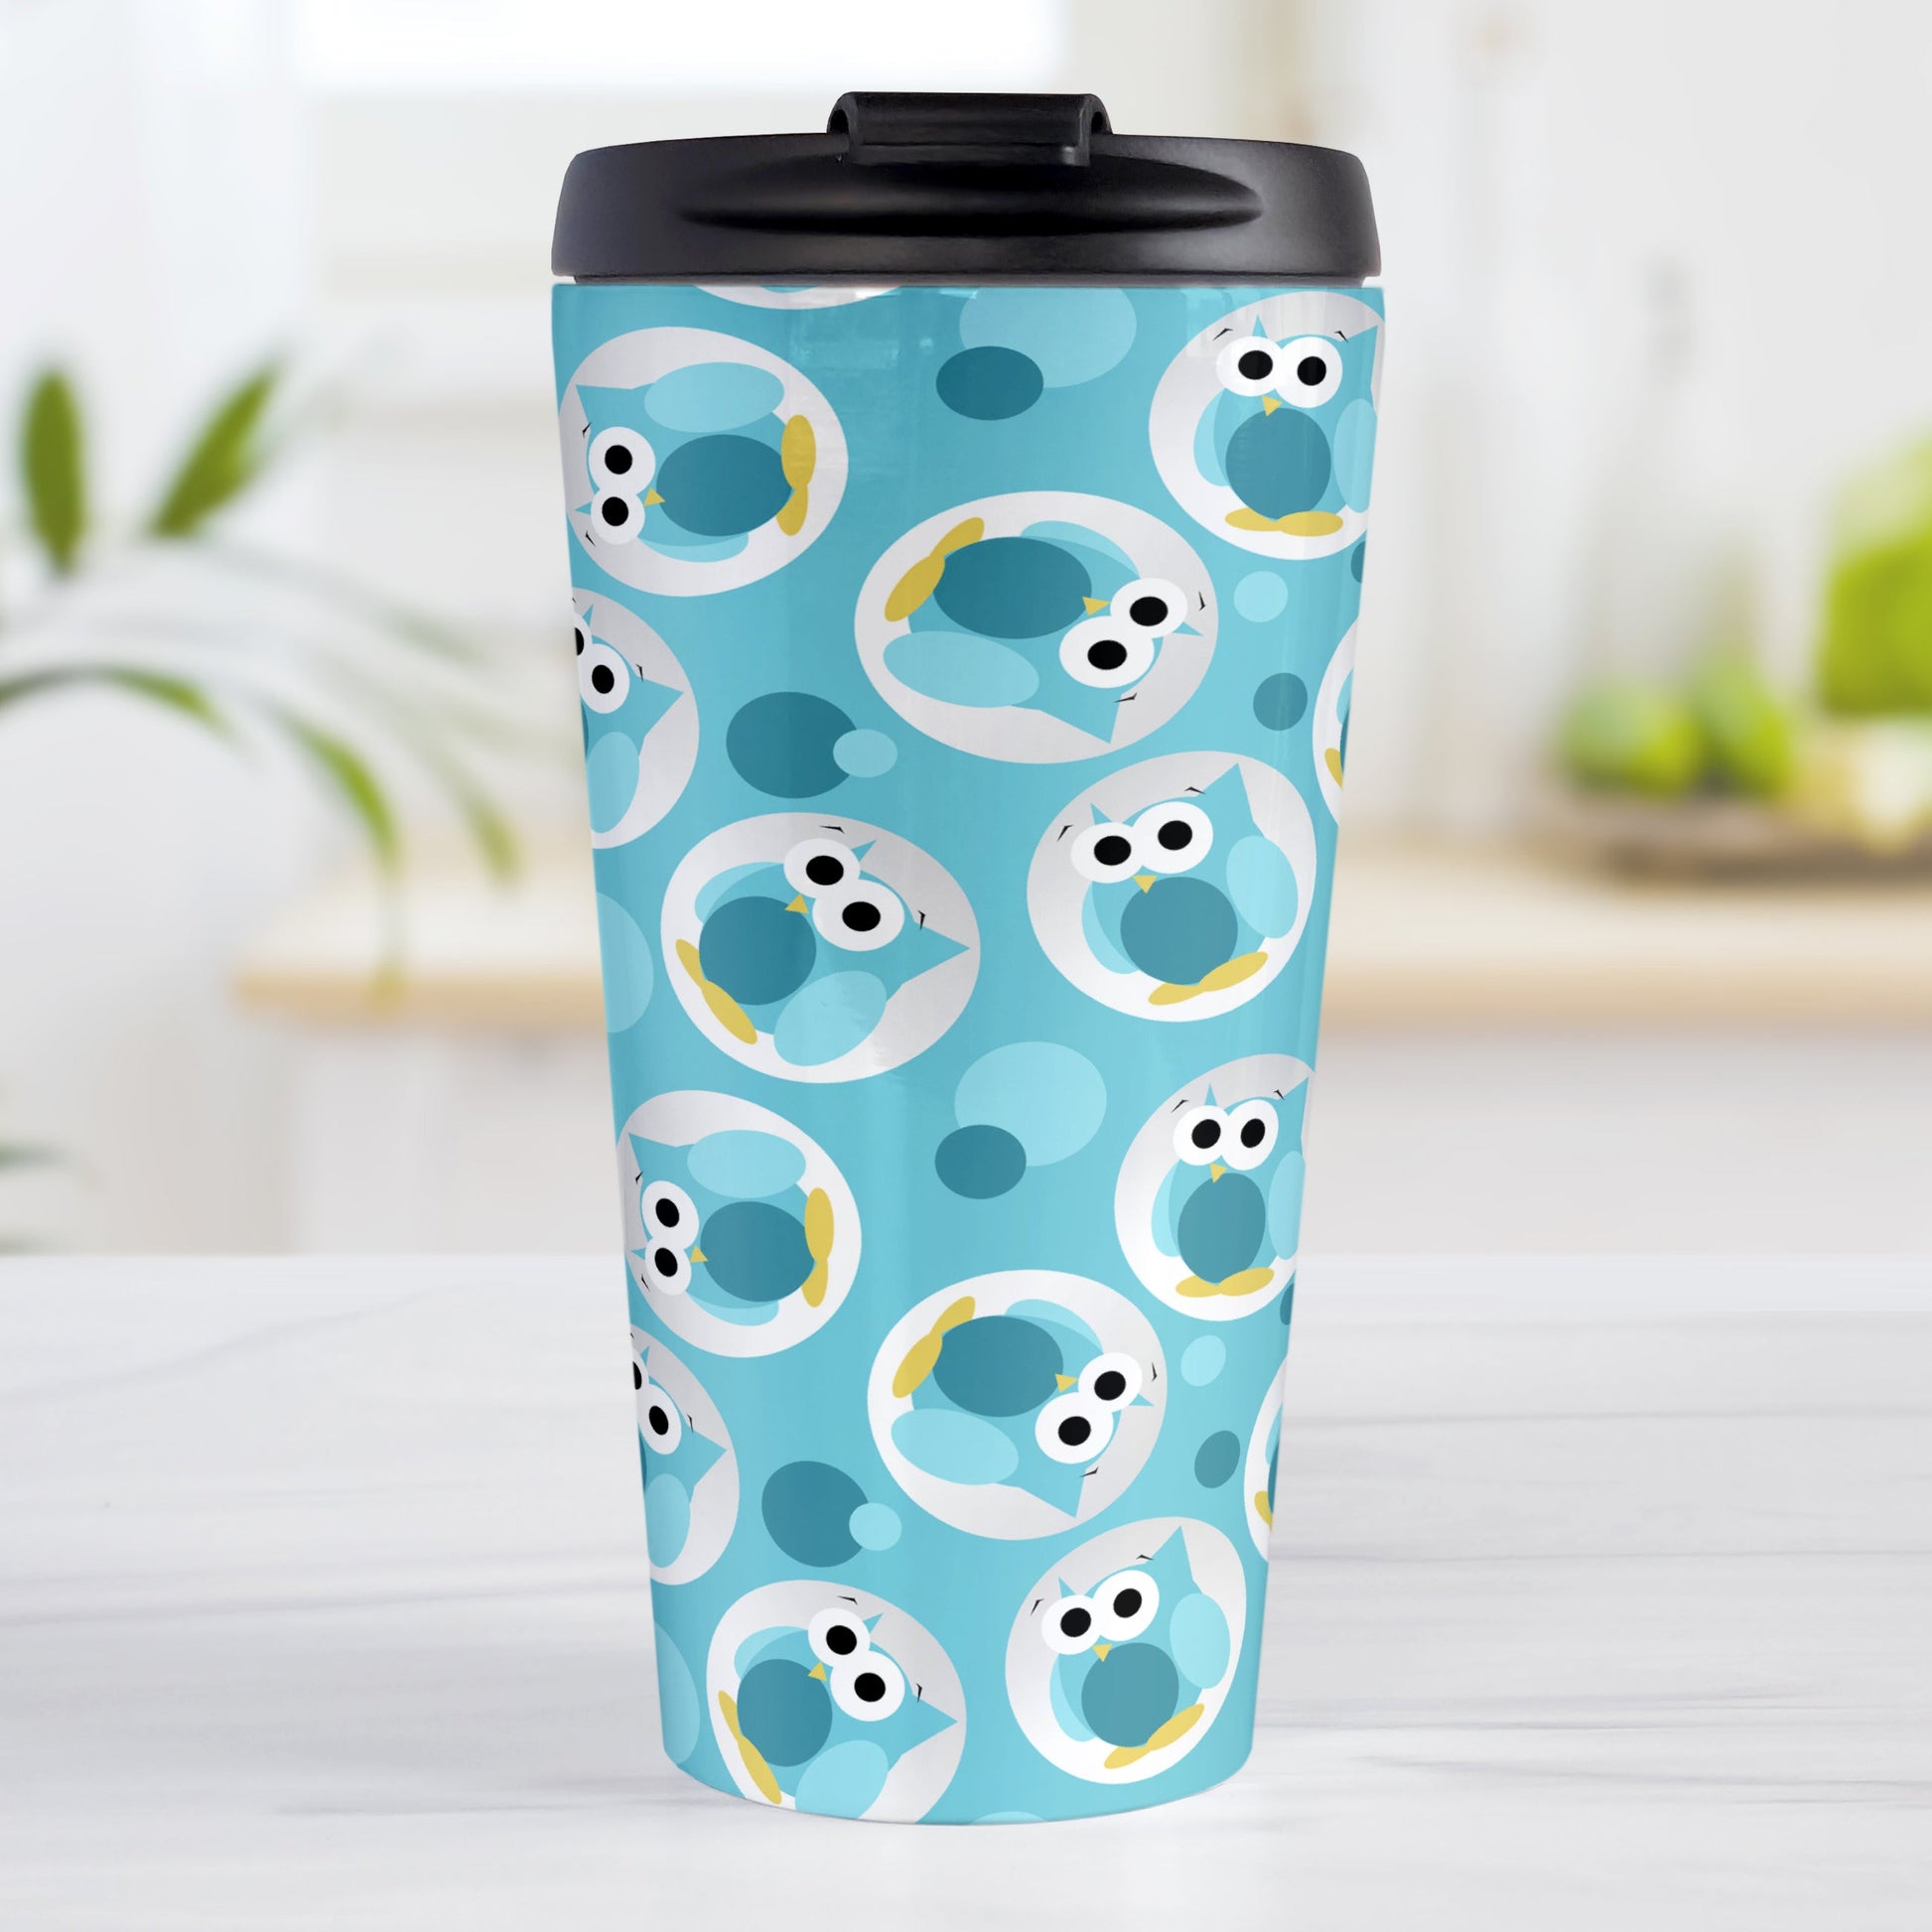 Funny Cute Turquoise Owl Pattern Travel Mug (15oz, stainless steel insulated) at Amy's Coffee Mugs